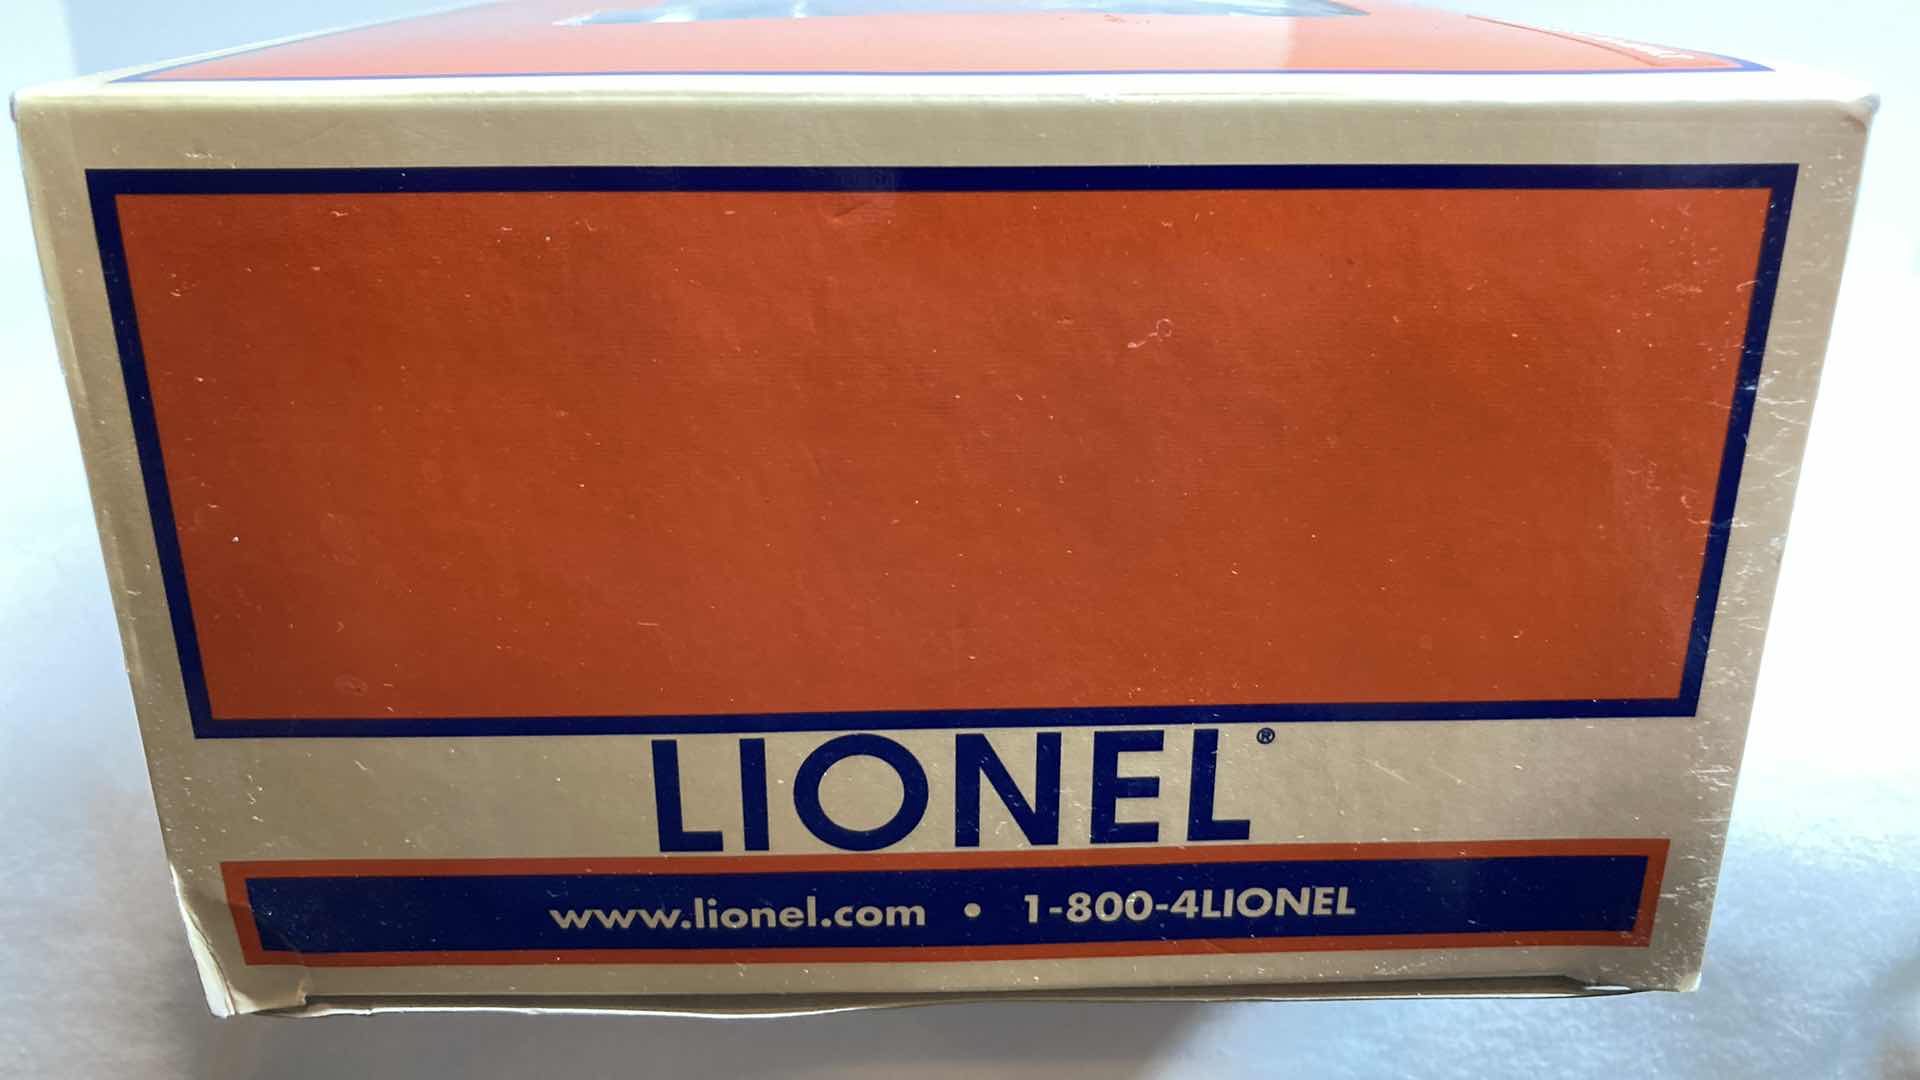 Photo 5 of LIONEL UP HERITAGE WP 60' BOXCAR
6-27254